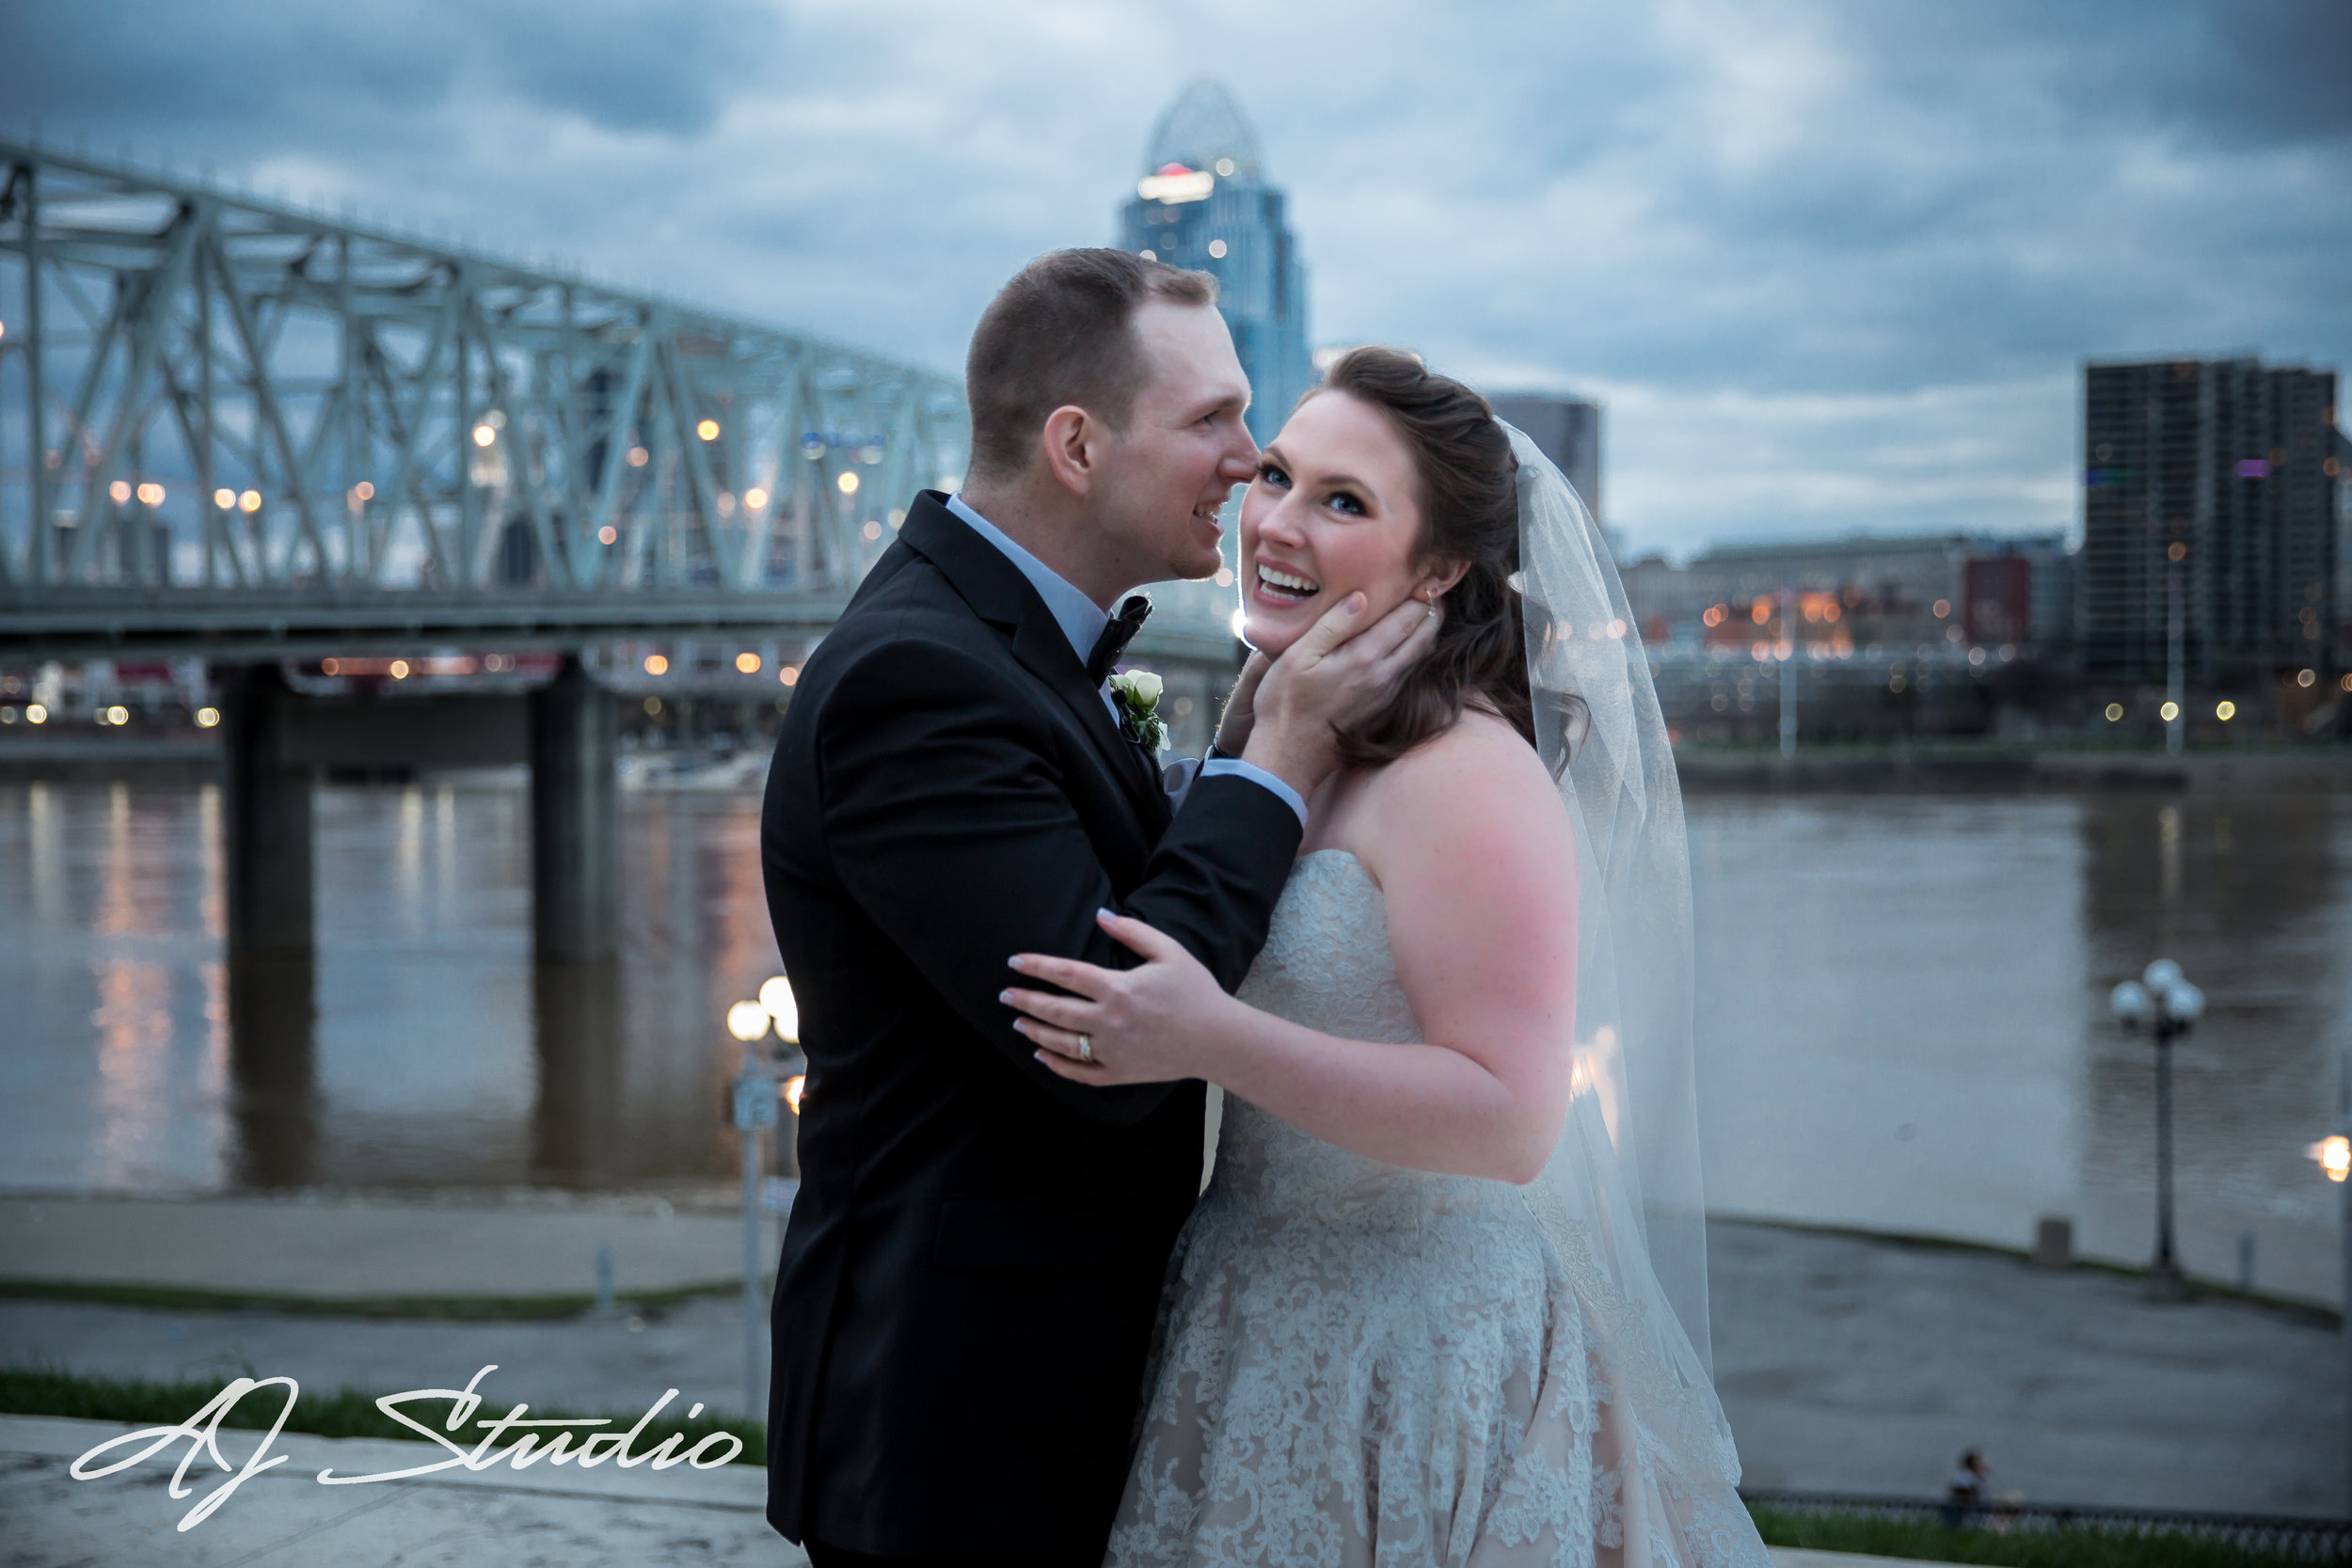 If you are interested in booking Newport Aquarium for your wedding, follow the link below. http://www.newportaquarium.com If you would like AJ Studio Photography by Angela & Jaime to Photograph your wedding, please contact us below. https://ajstudiollc.com/say-hi/